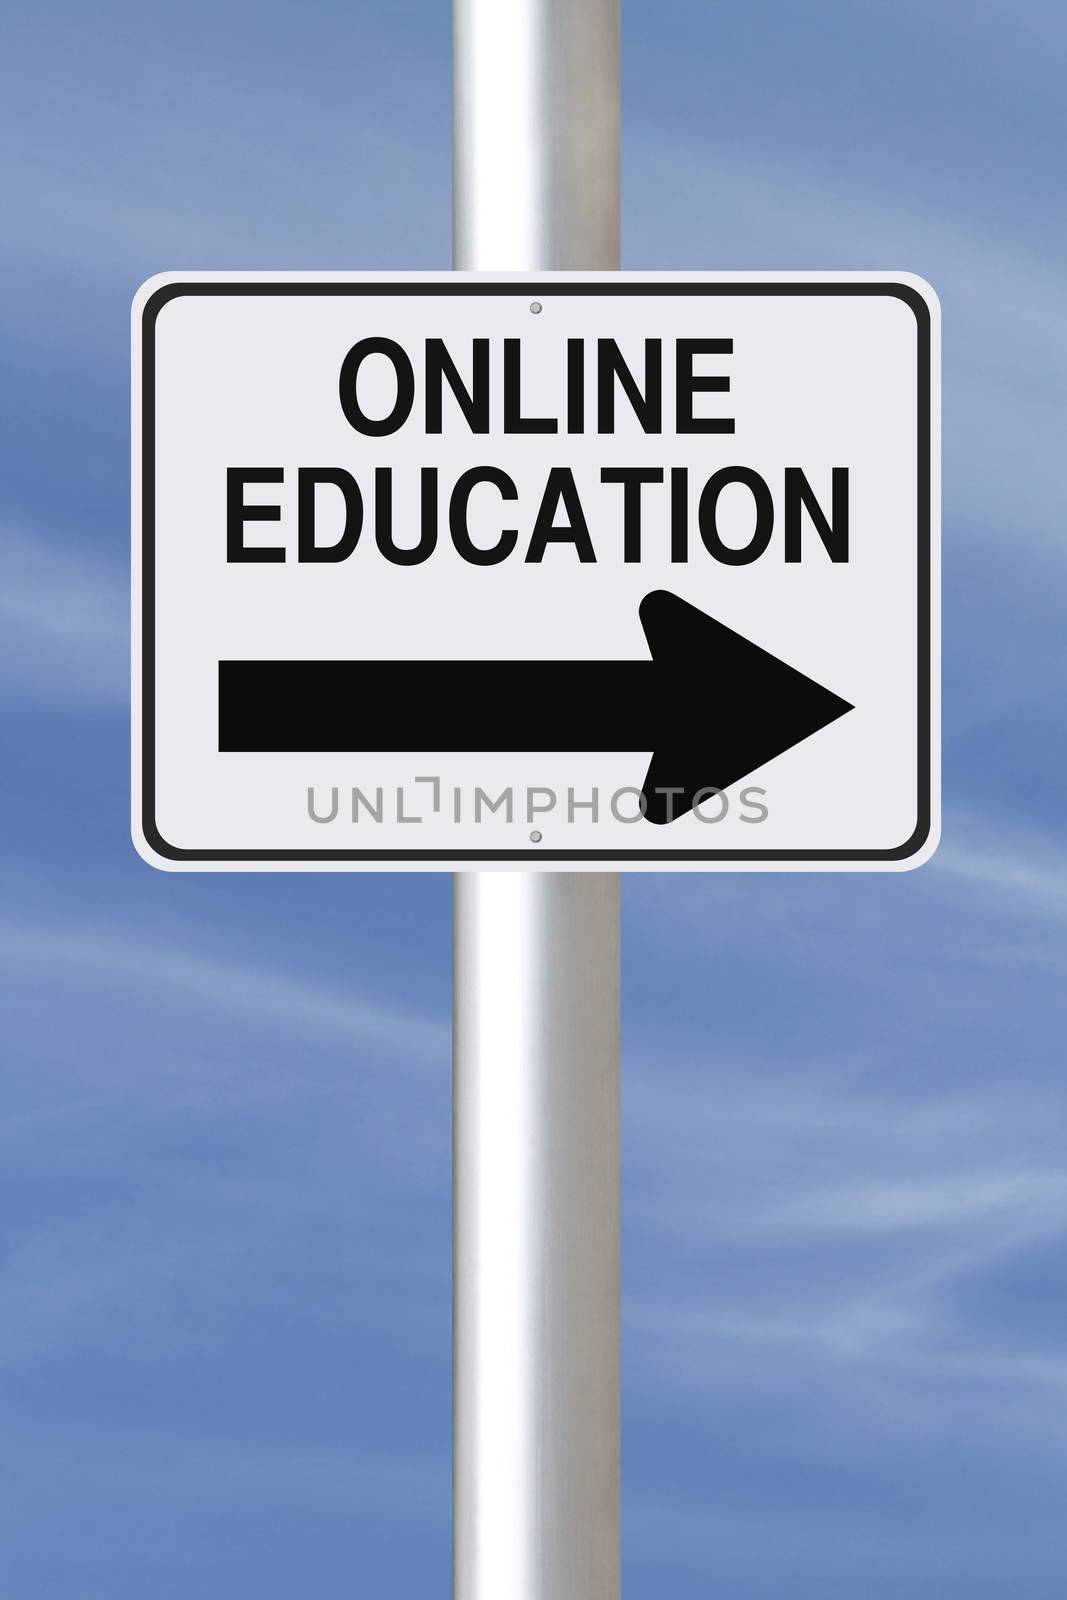 Online Education This Way by rnl